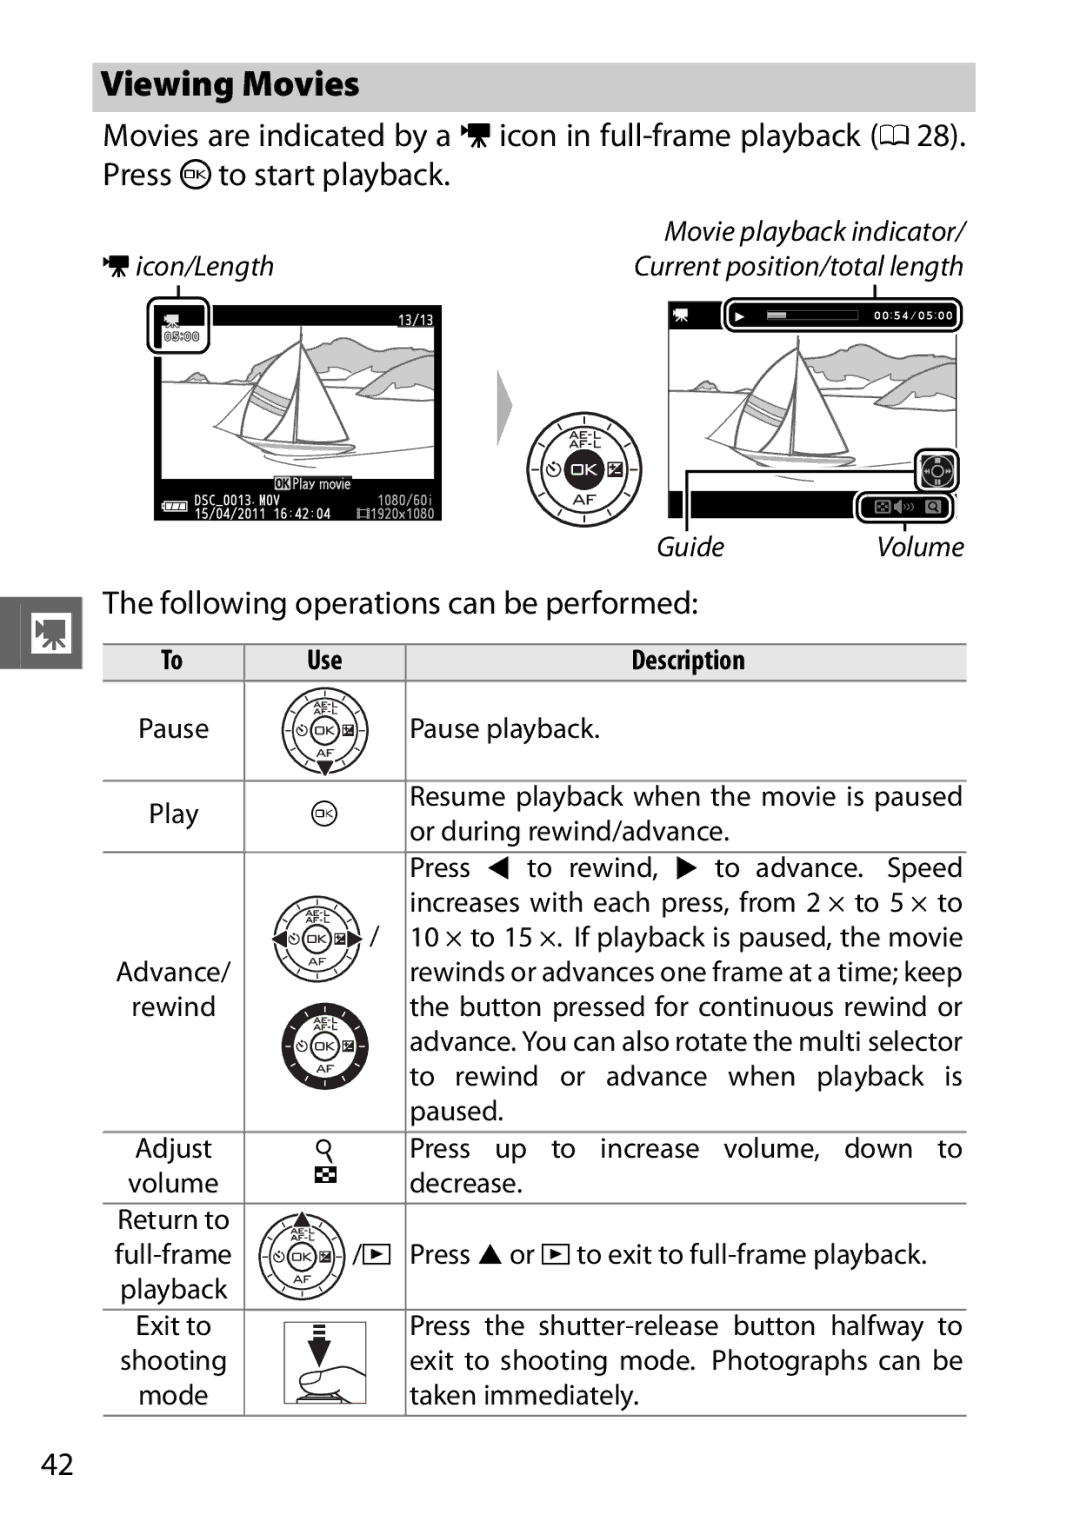 Nikon V1 manual Viewing Movies, Following operations can be performed, Use, Pause playback 